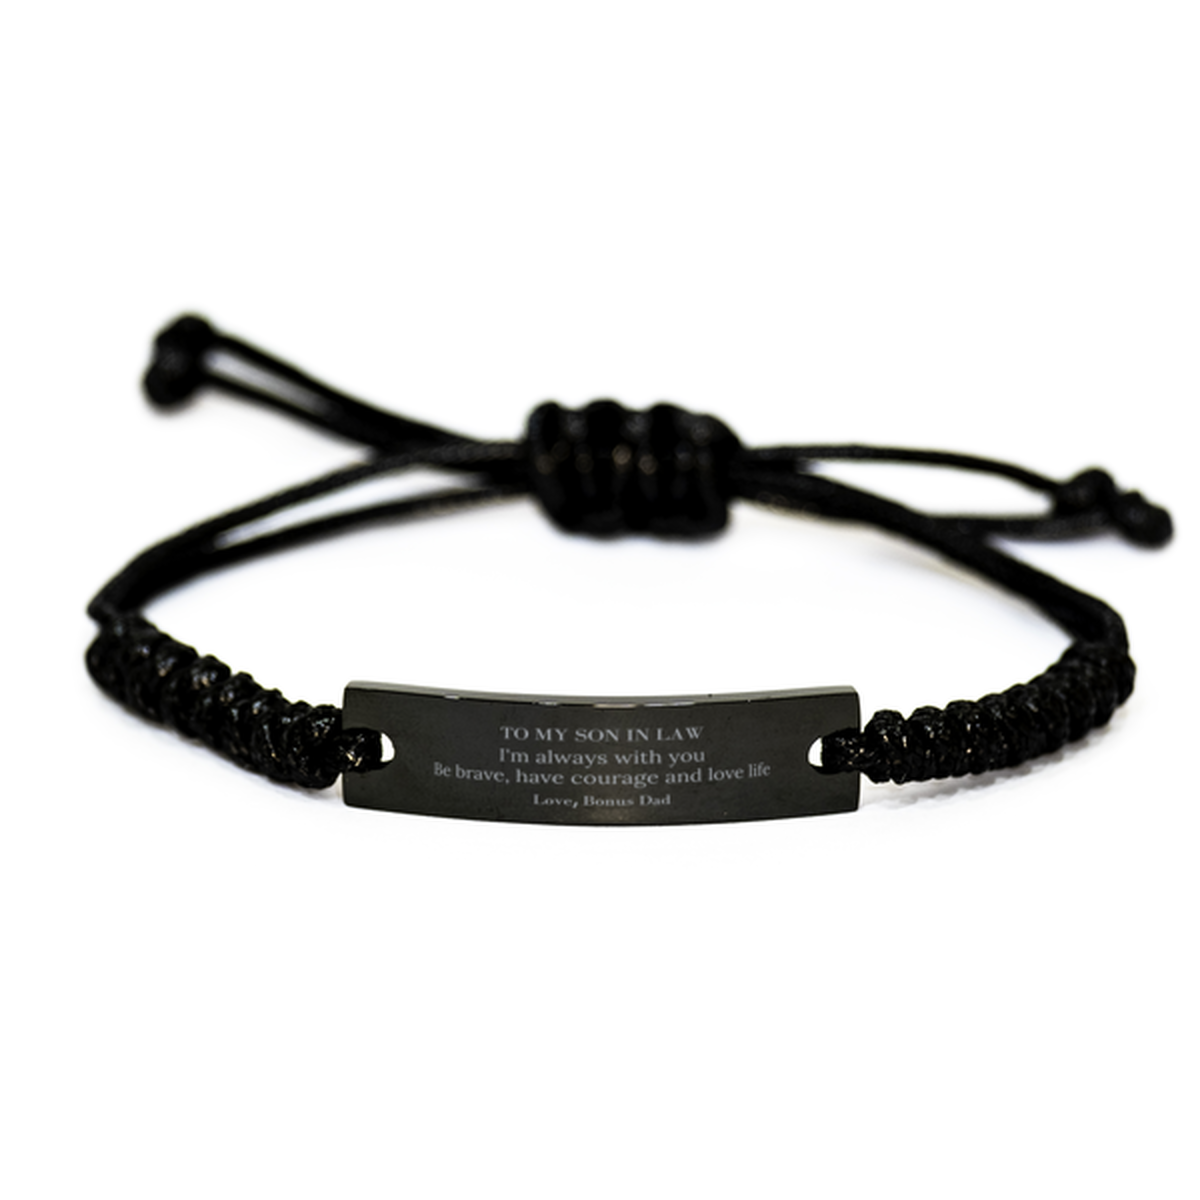 To My Son In Law Gifts from Bonus Dad, Unique Black Rope Bracelet Inspirational Christmas Birthday Graduation Gifts for Son In Law I'm always with you. Be brave, have courage and love life. Love, Bonus Dad